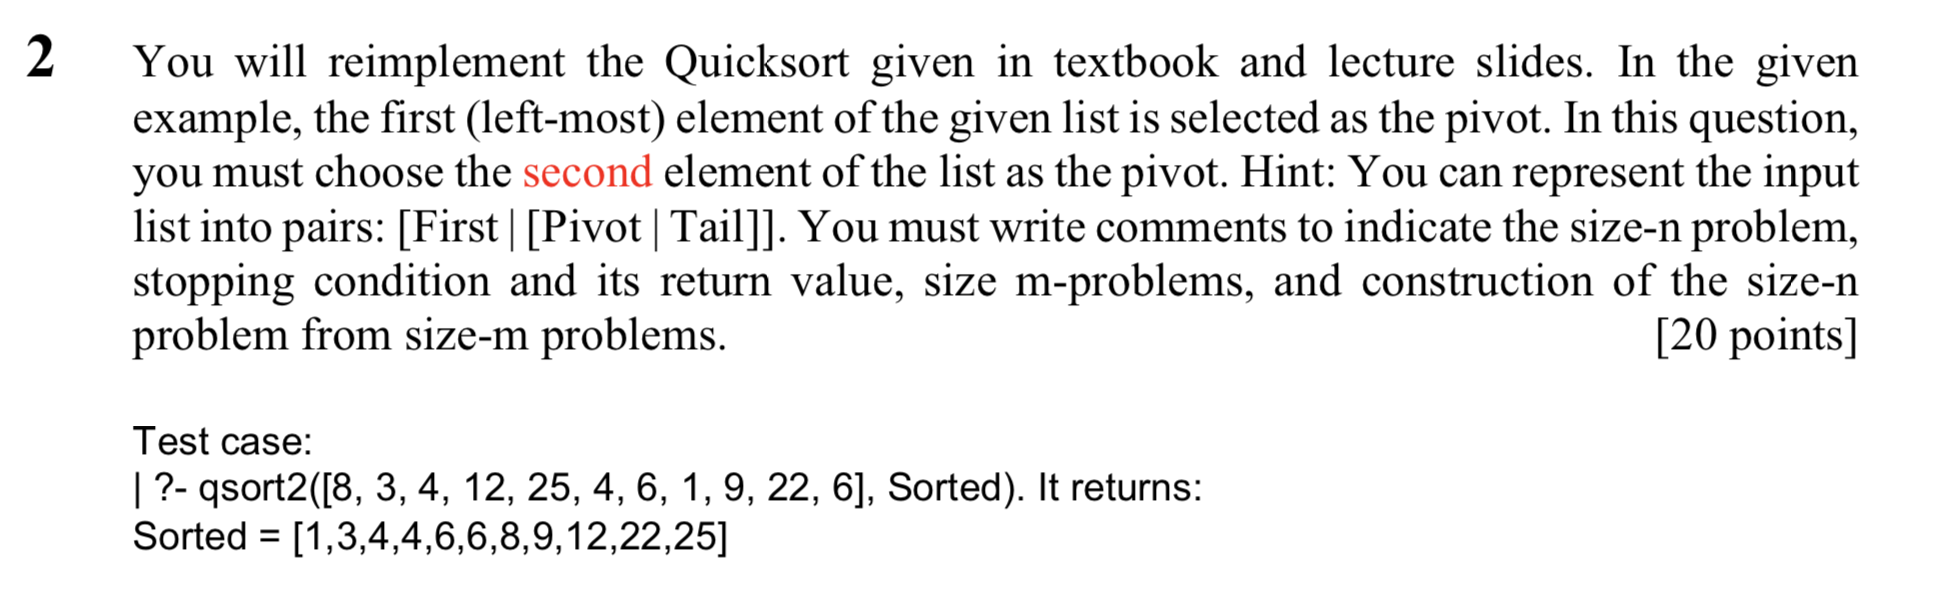 You will reimplement the Quicksort given in textbook and lecture slides. In the given example, the first (left-most) element